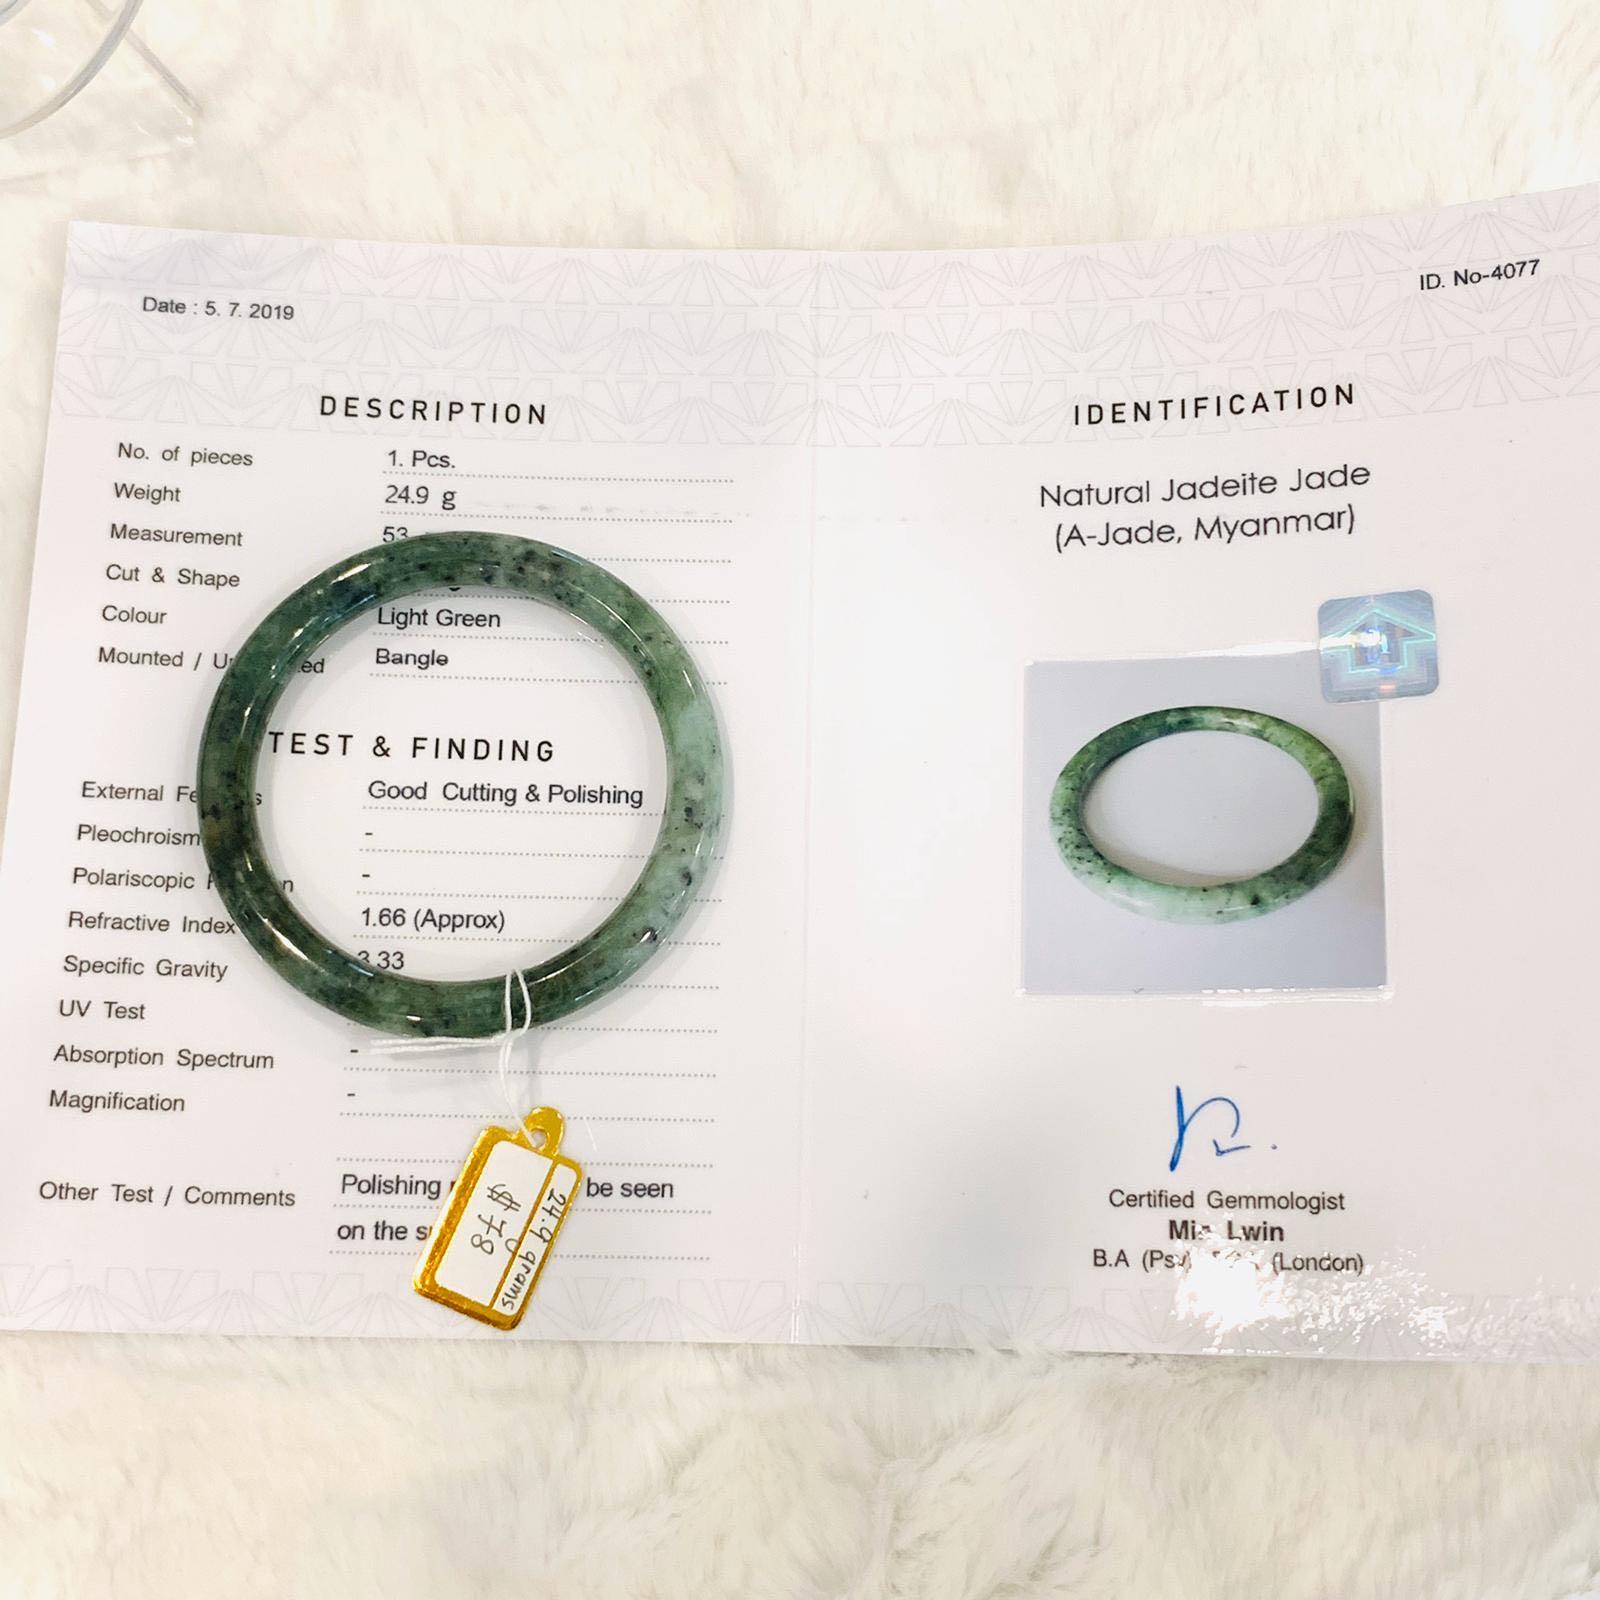 Grade A Natural Jade Bangle with certificate #4077